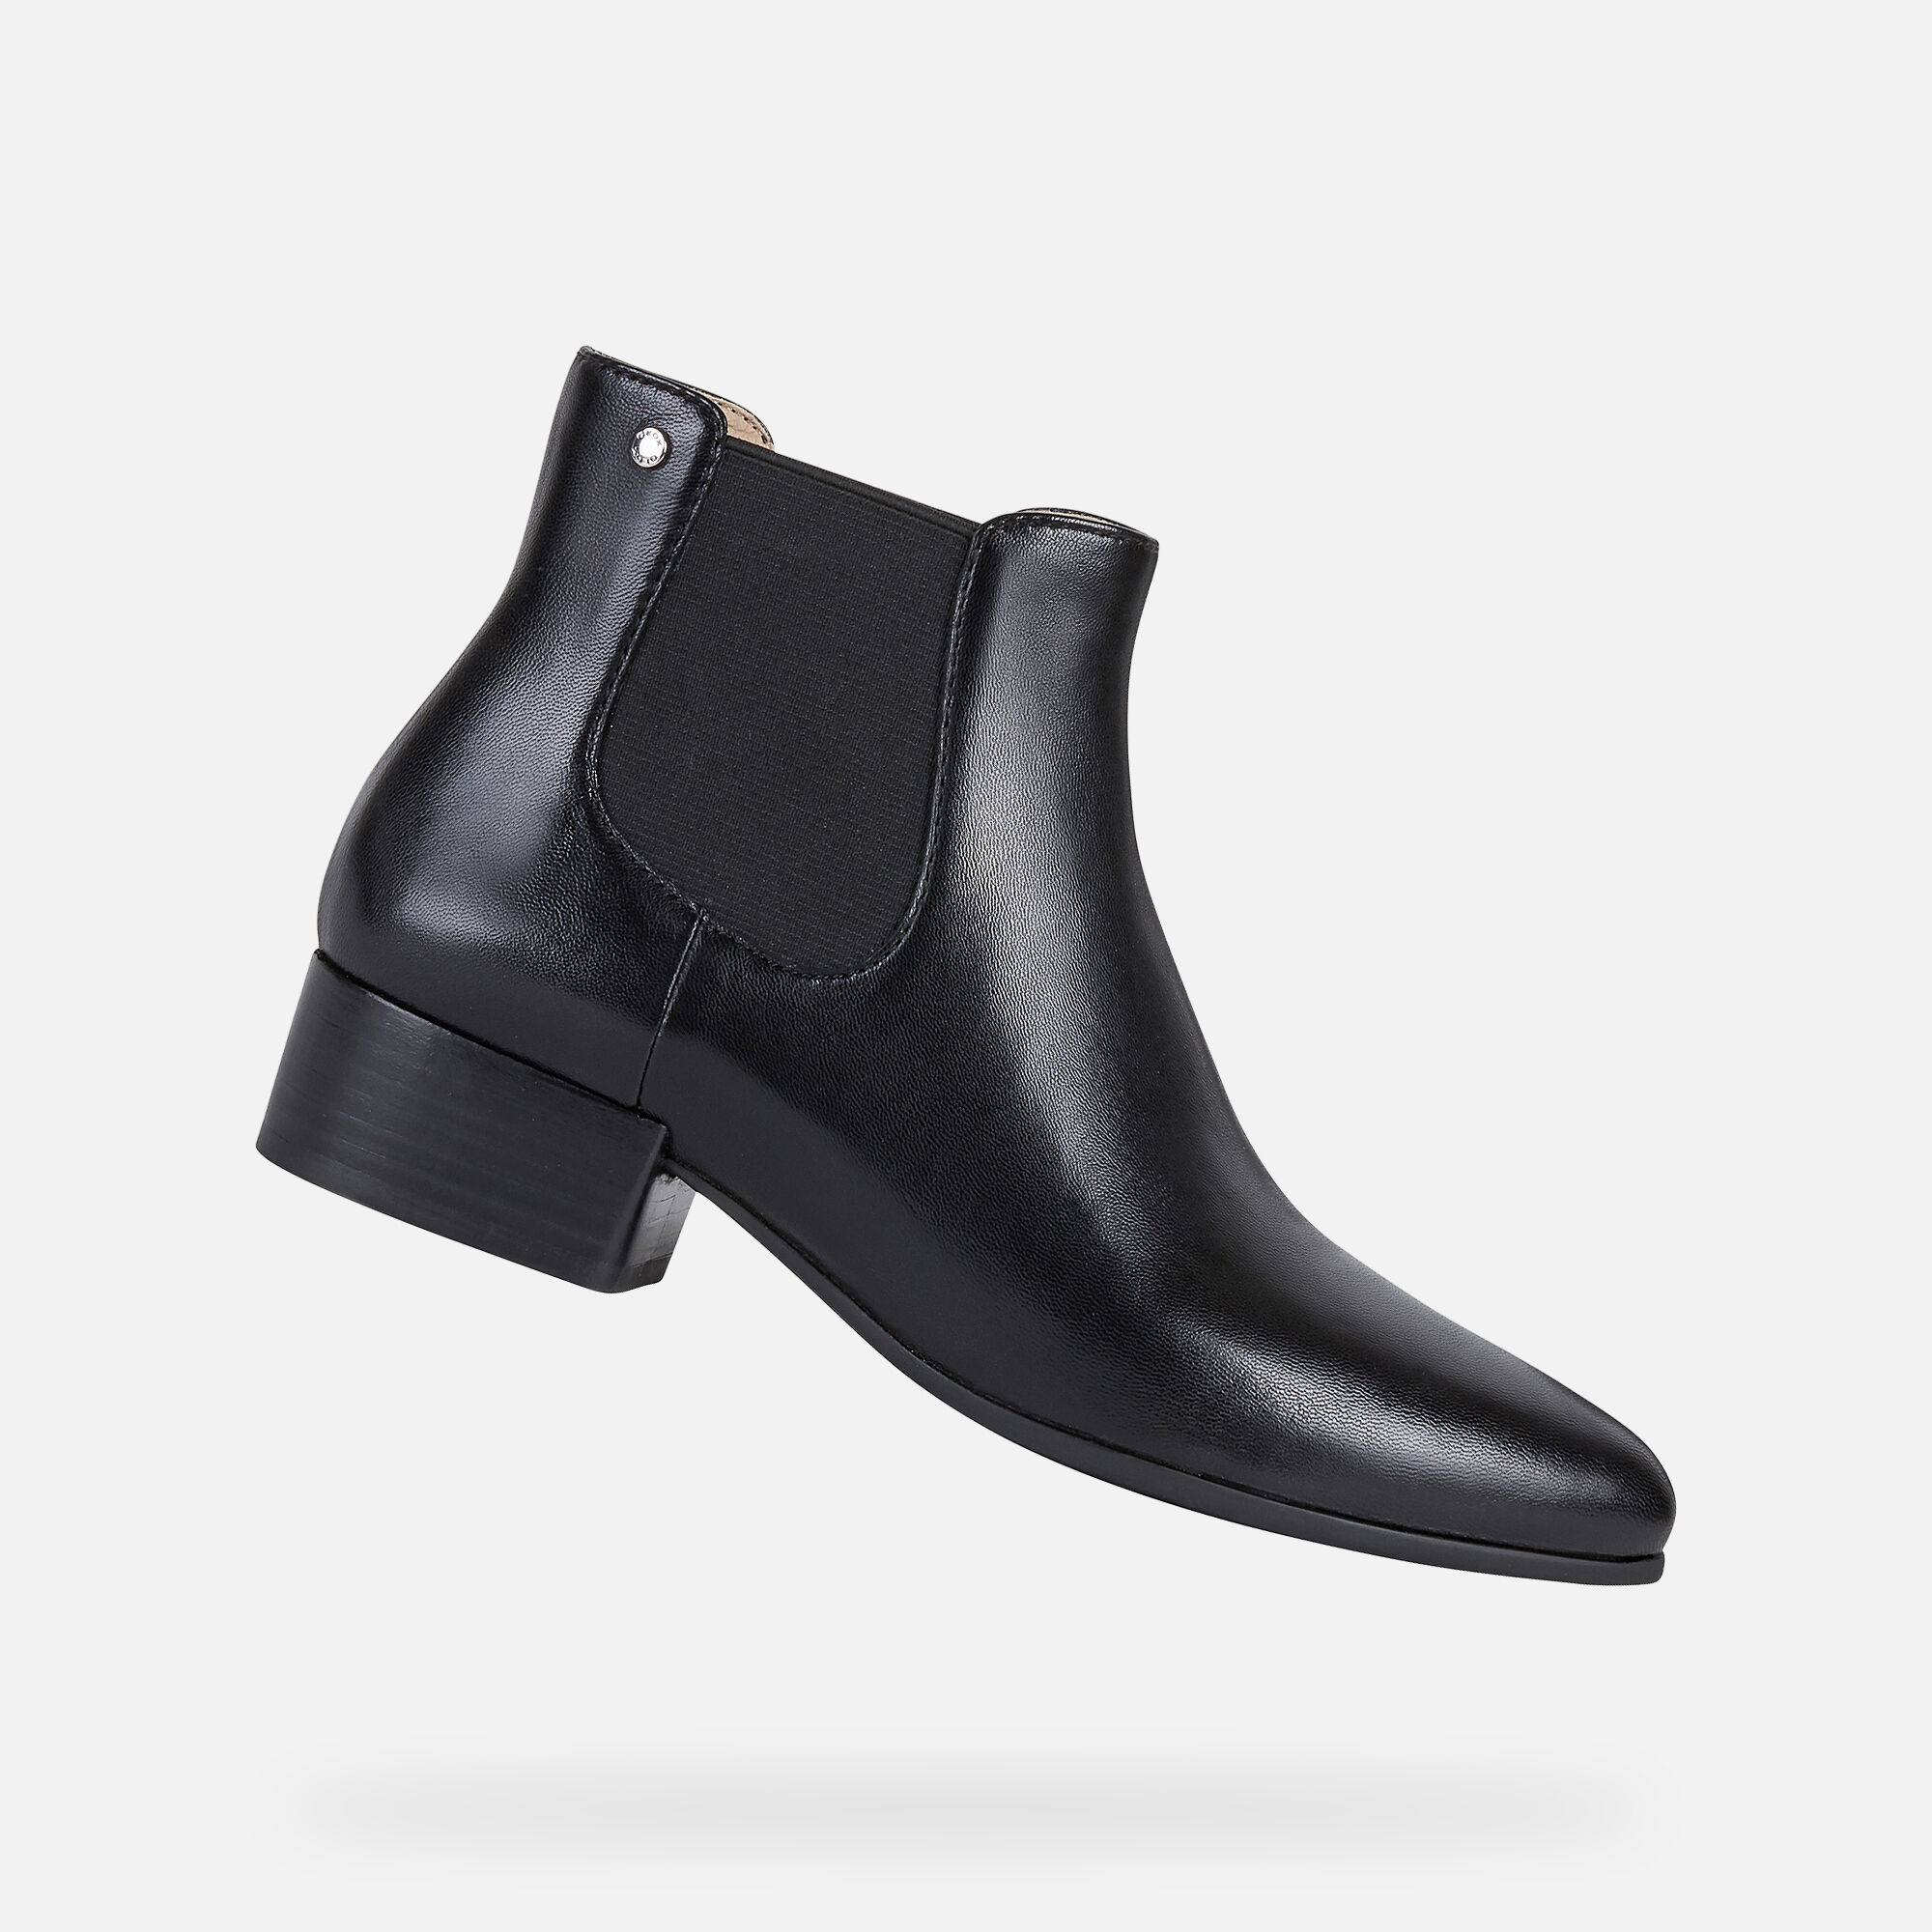 chelsea boots with grip